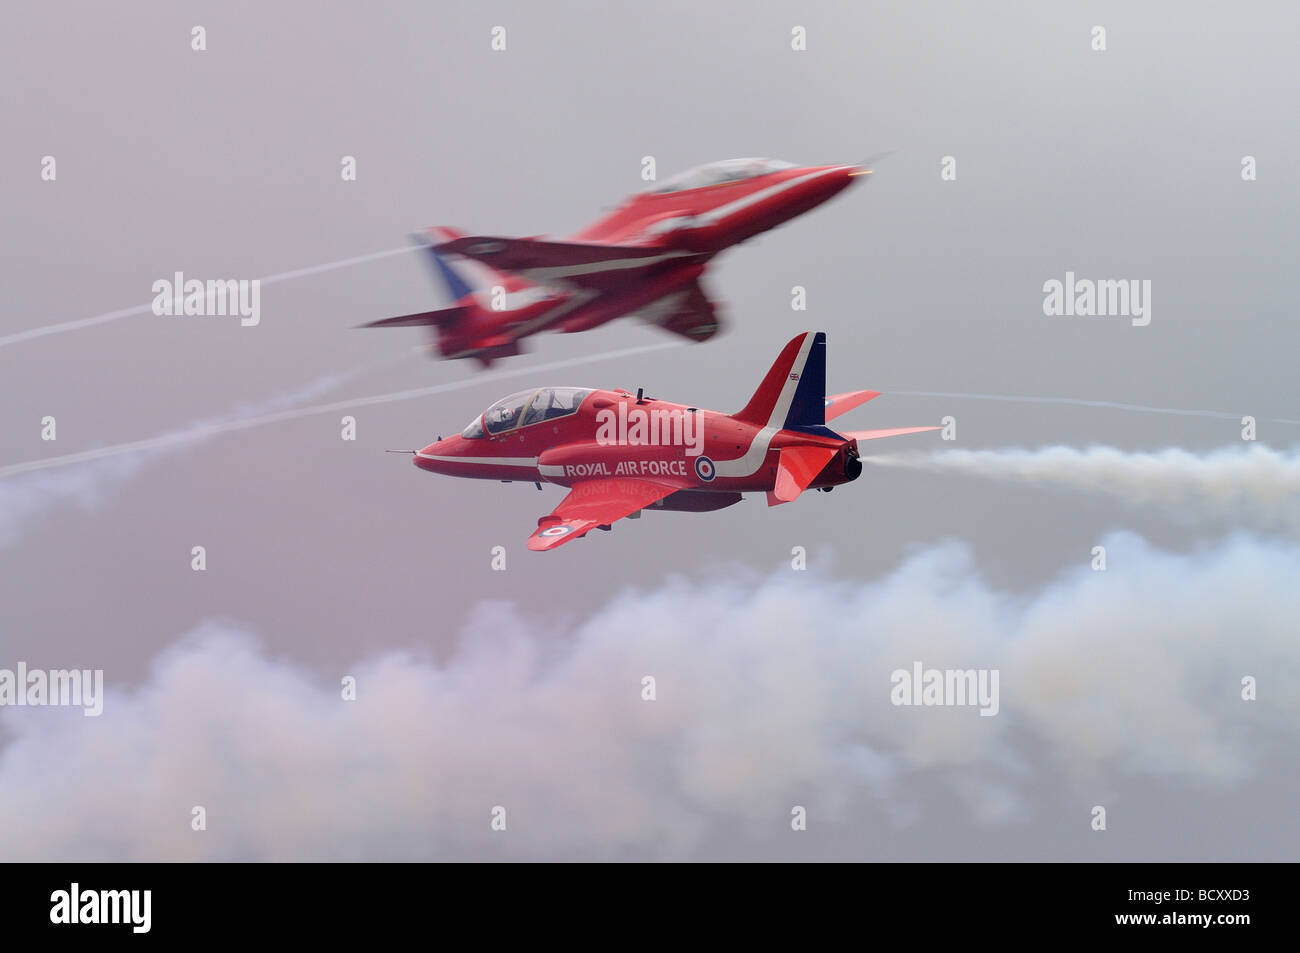 The Red Arrows Display Team Syncho Pair of Hawk T1 Trainer aeroplanes practice their dangerous opposition barrel rolls. Stock Photo